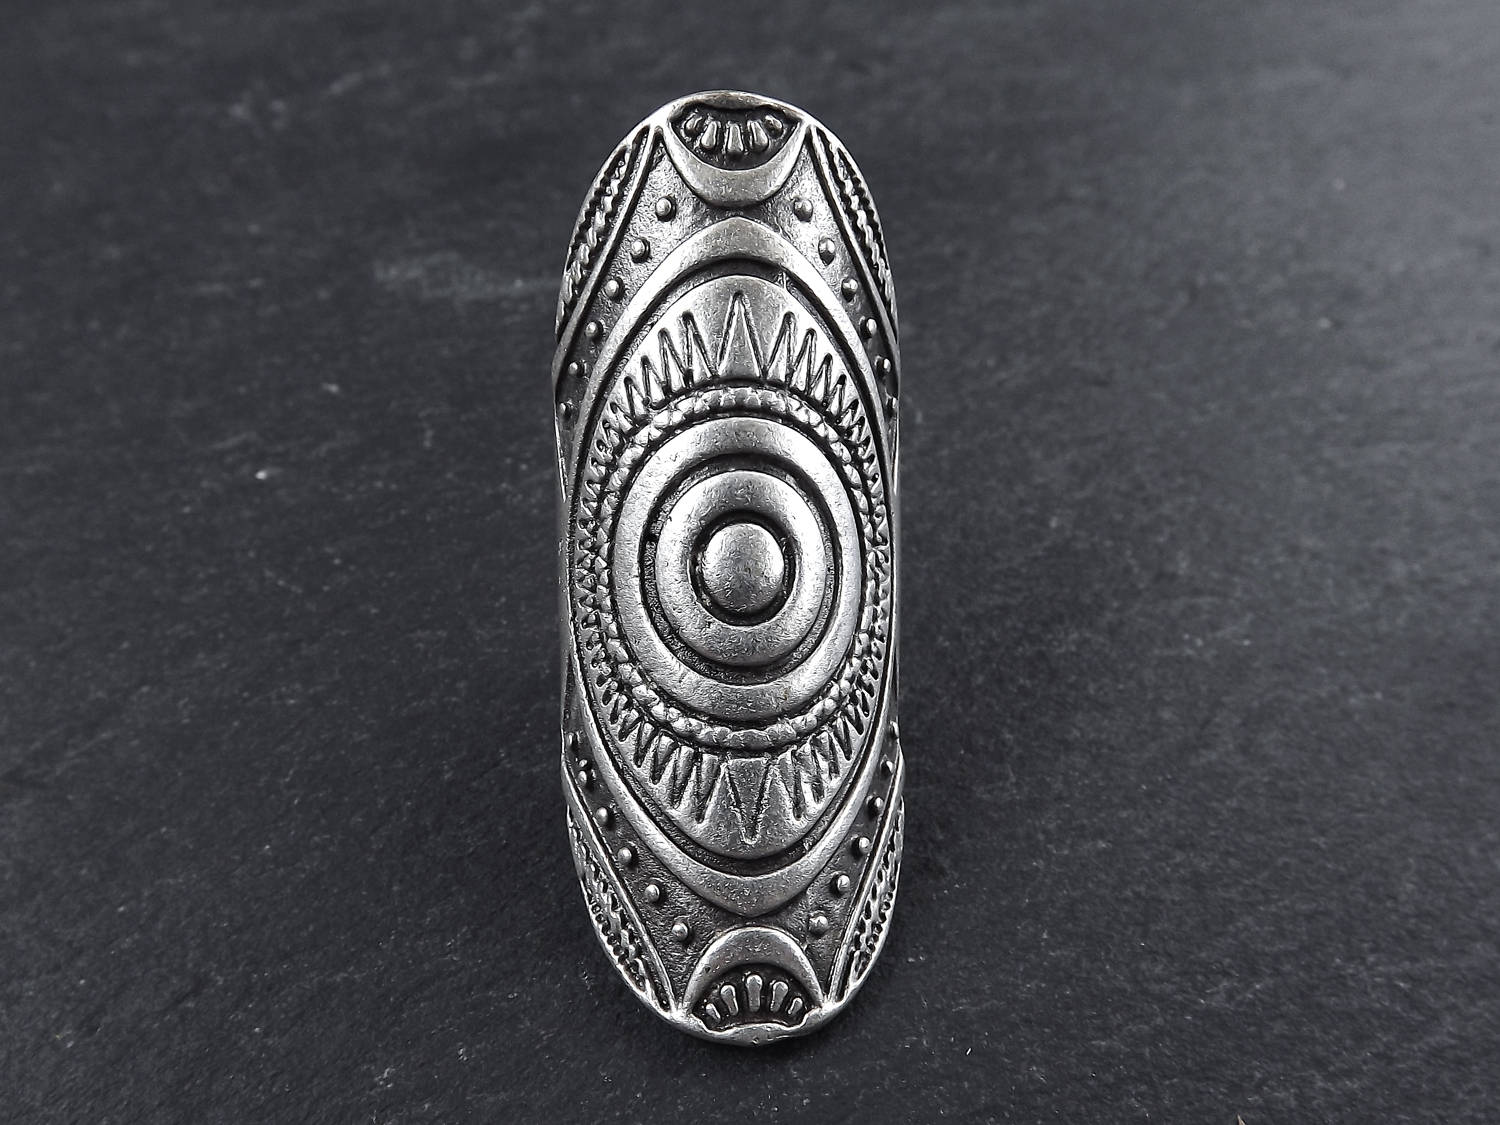 Silver Oval Tribal Ethnic Boho Finger Cuff Statement Ring | Etsy